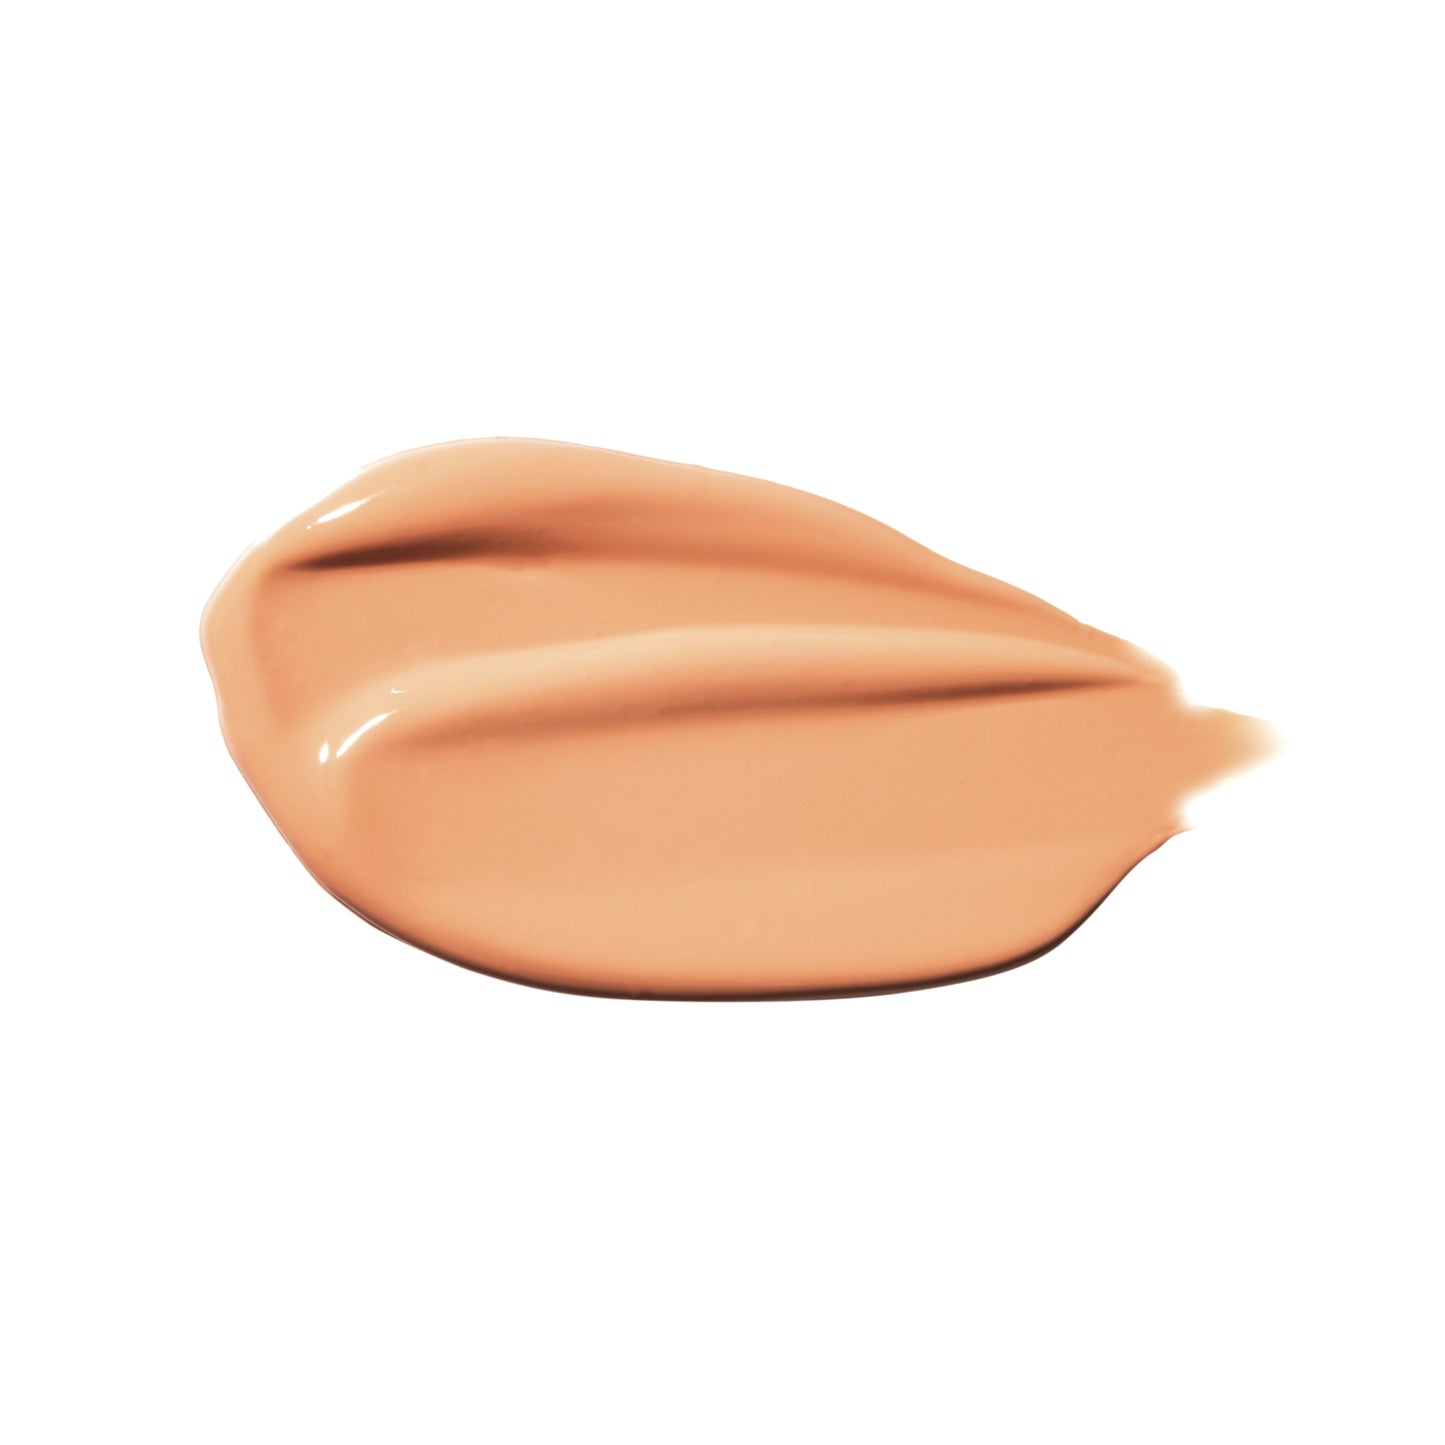 100% PURE Fruit Pigmented Healthy Foundation sand